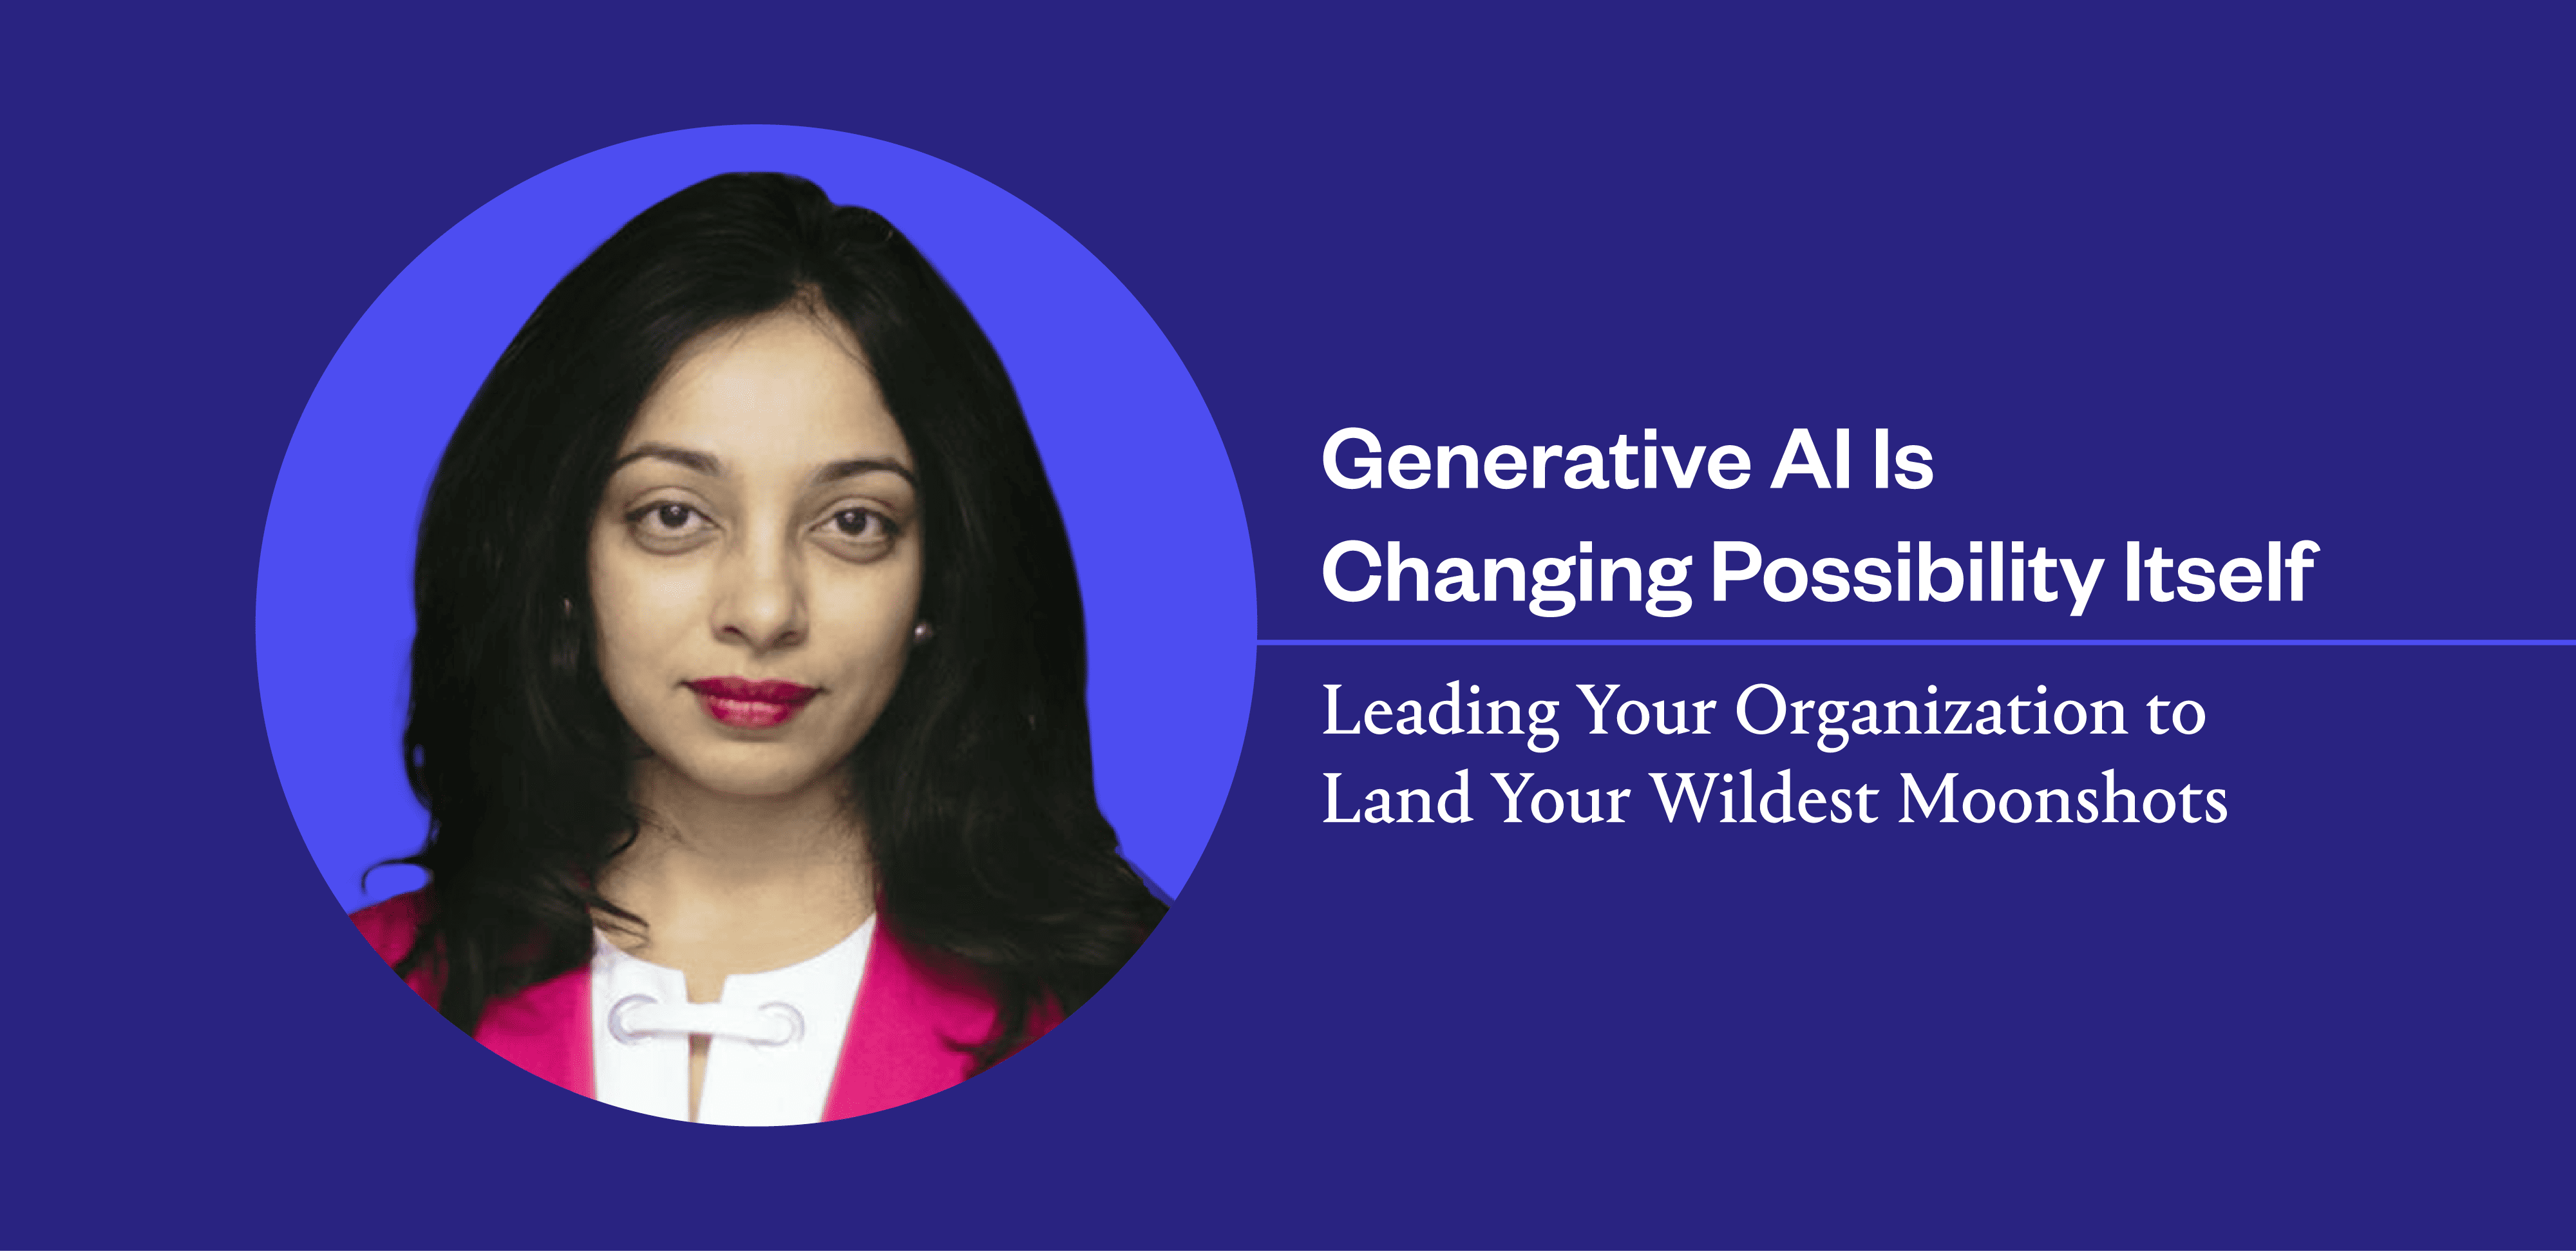 Generative AI Has Brought Your Most Ambitious “Moonshots” Within Reach. AI Entrepreneur Radhika Dirks